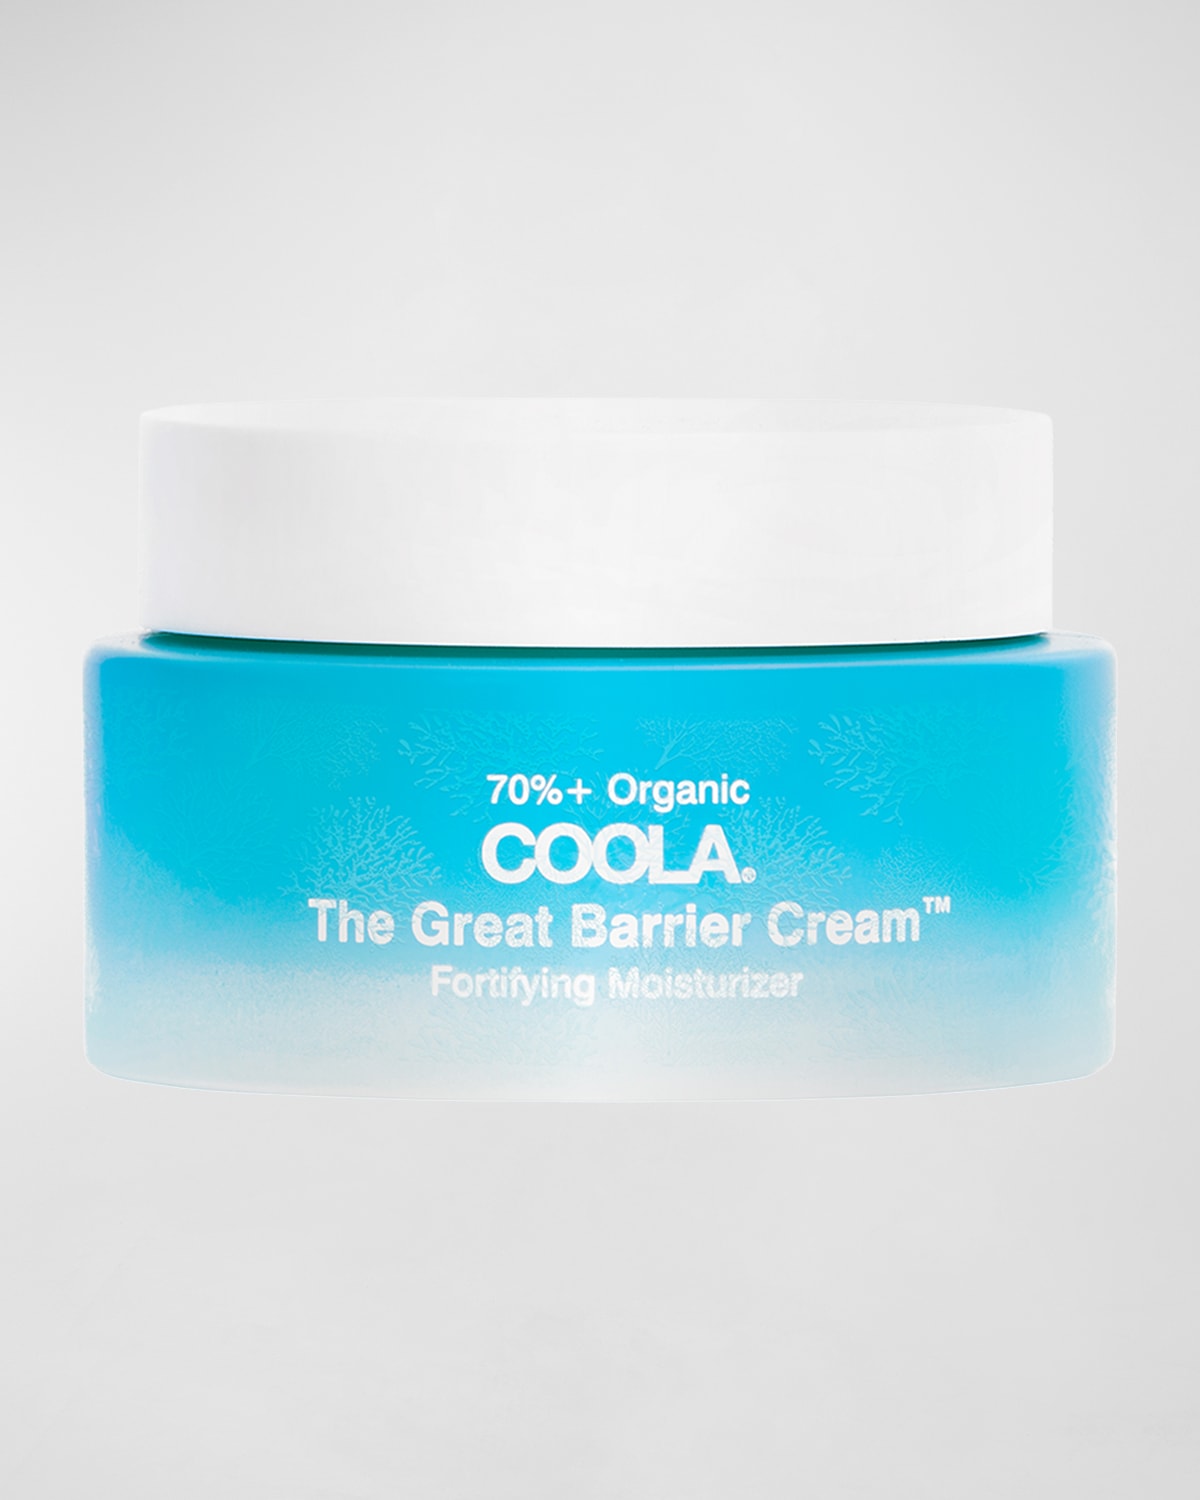 COOLA The Great Barrier Cream Fortifying Moisturizer